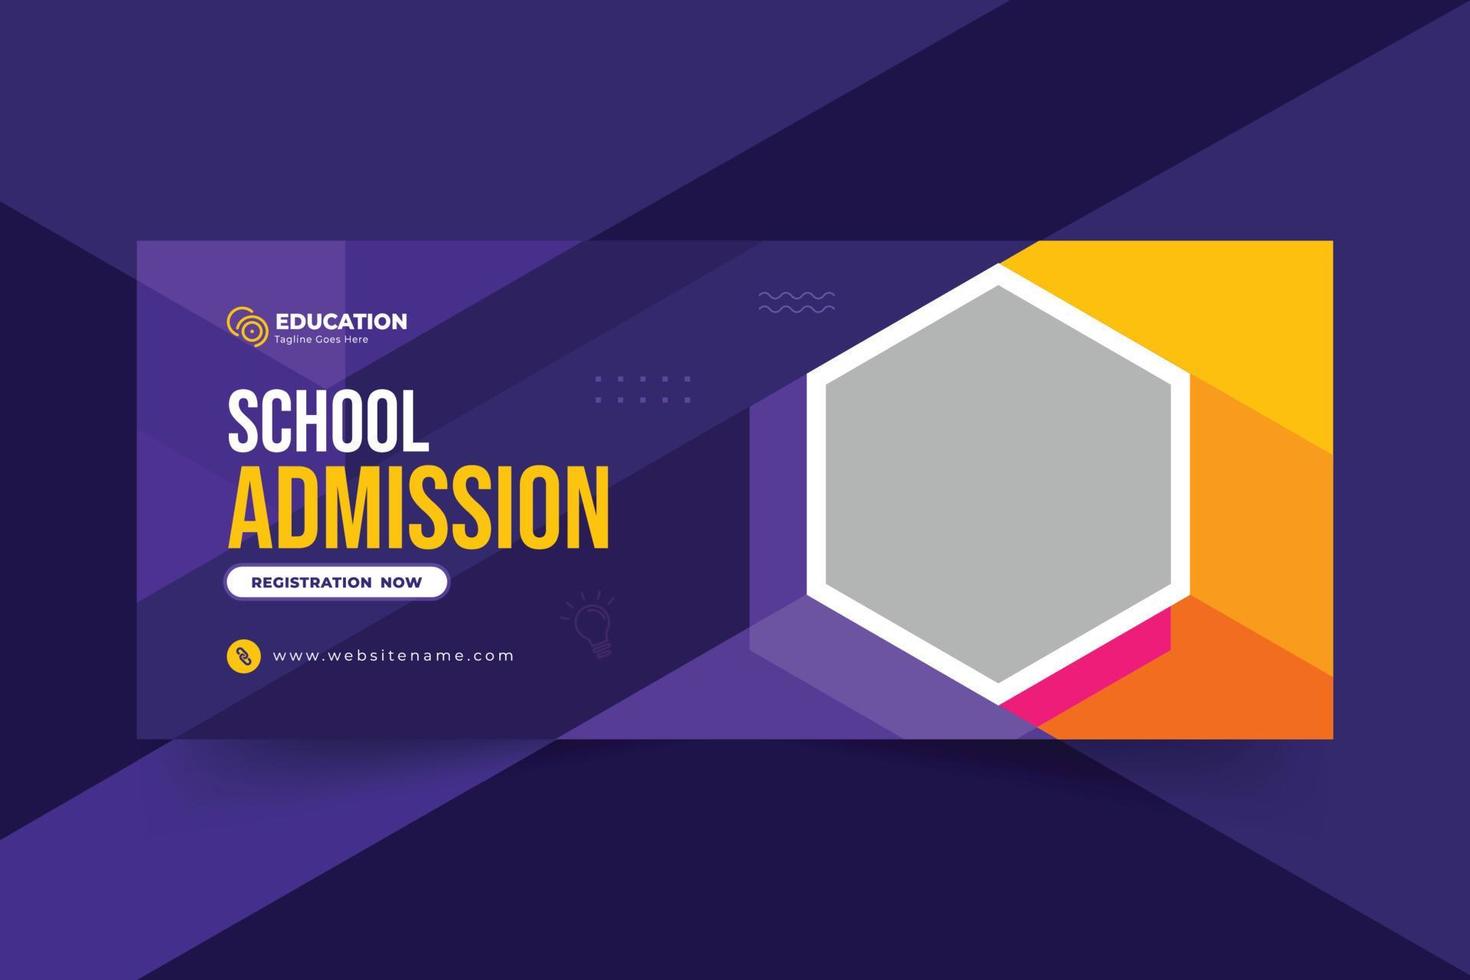 School admission web banner and social media cover template vector